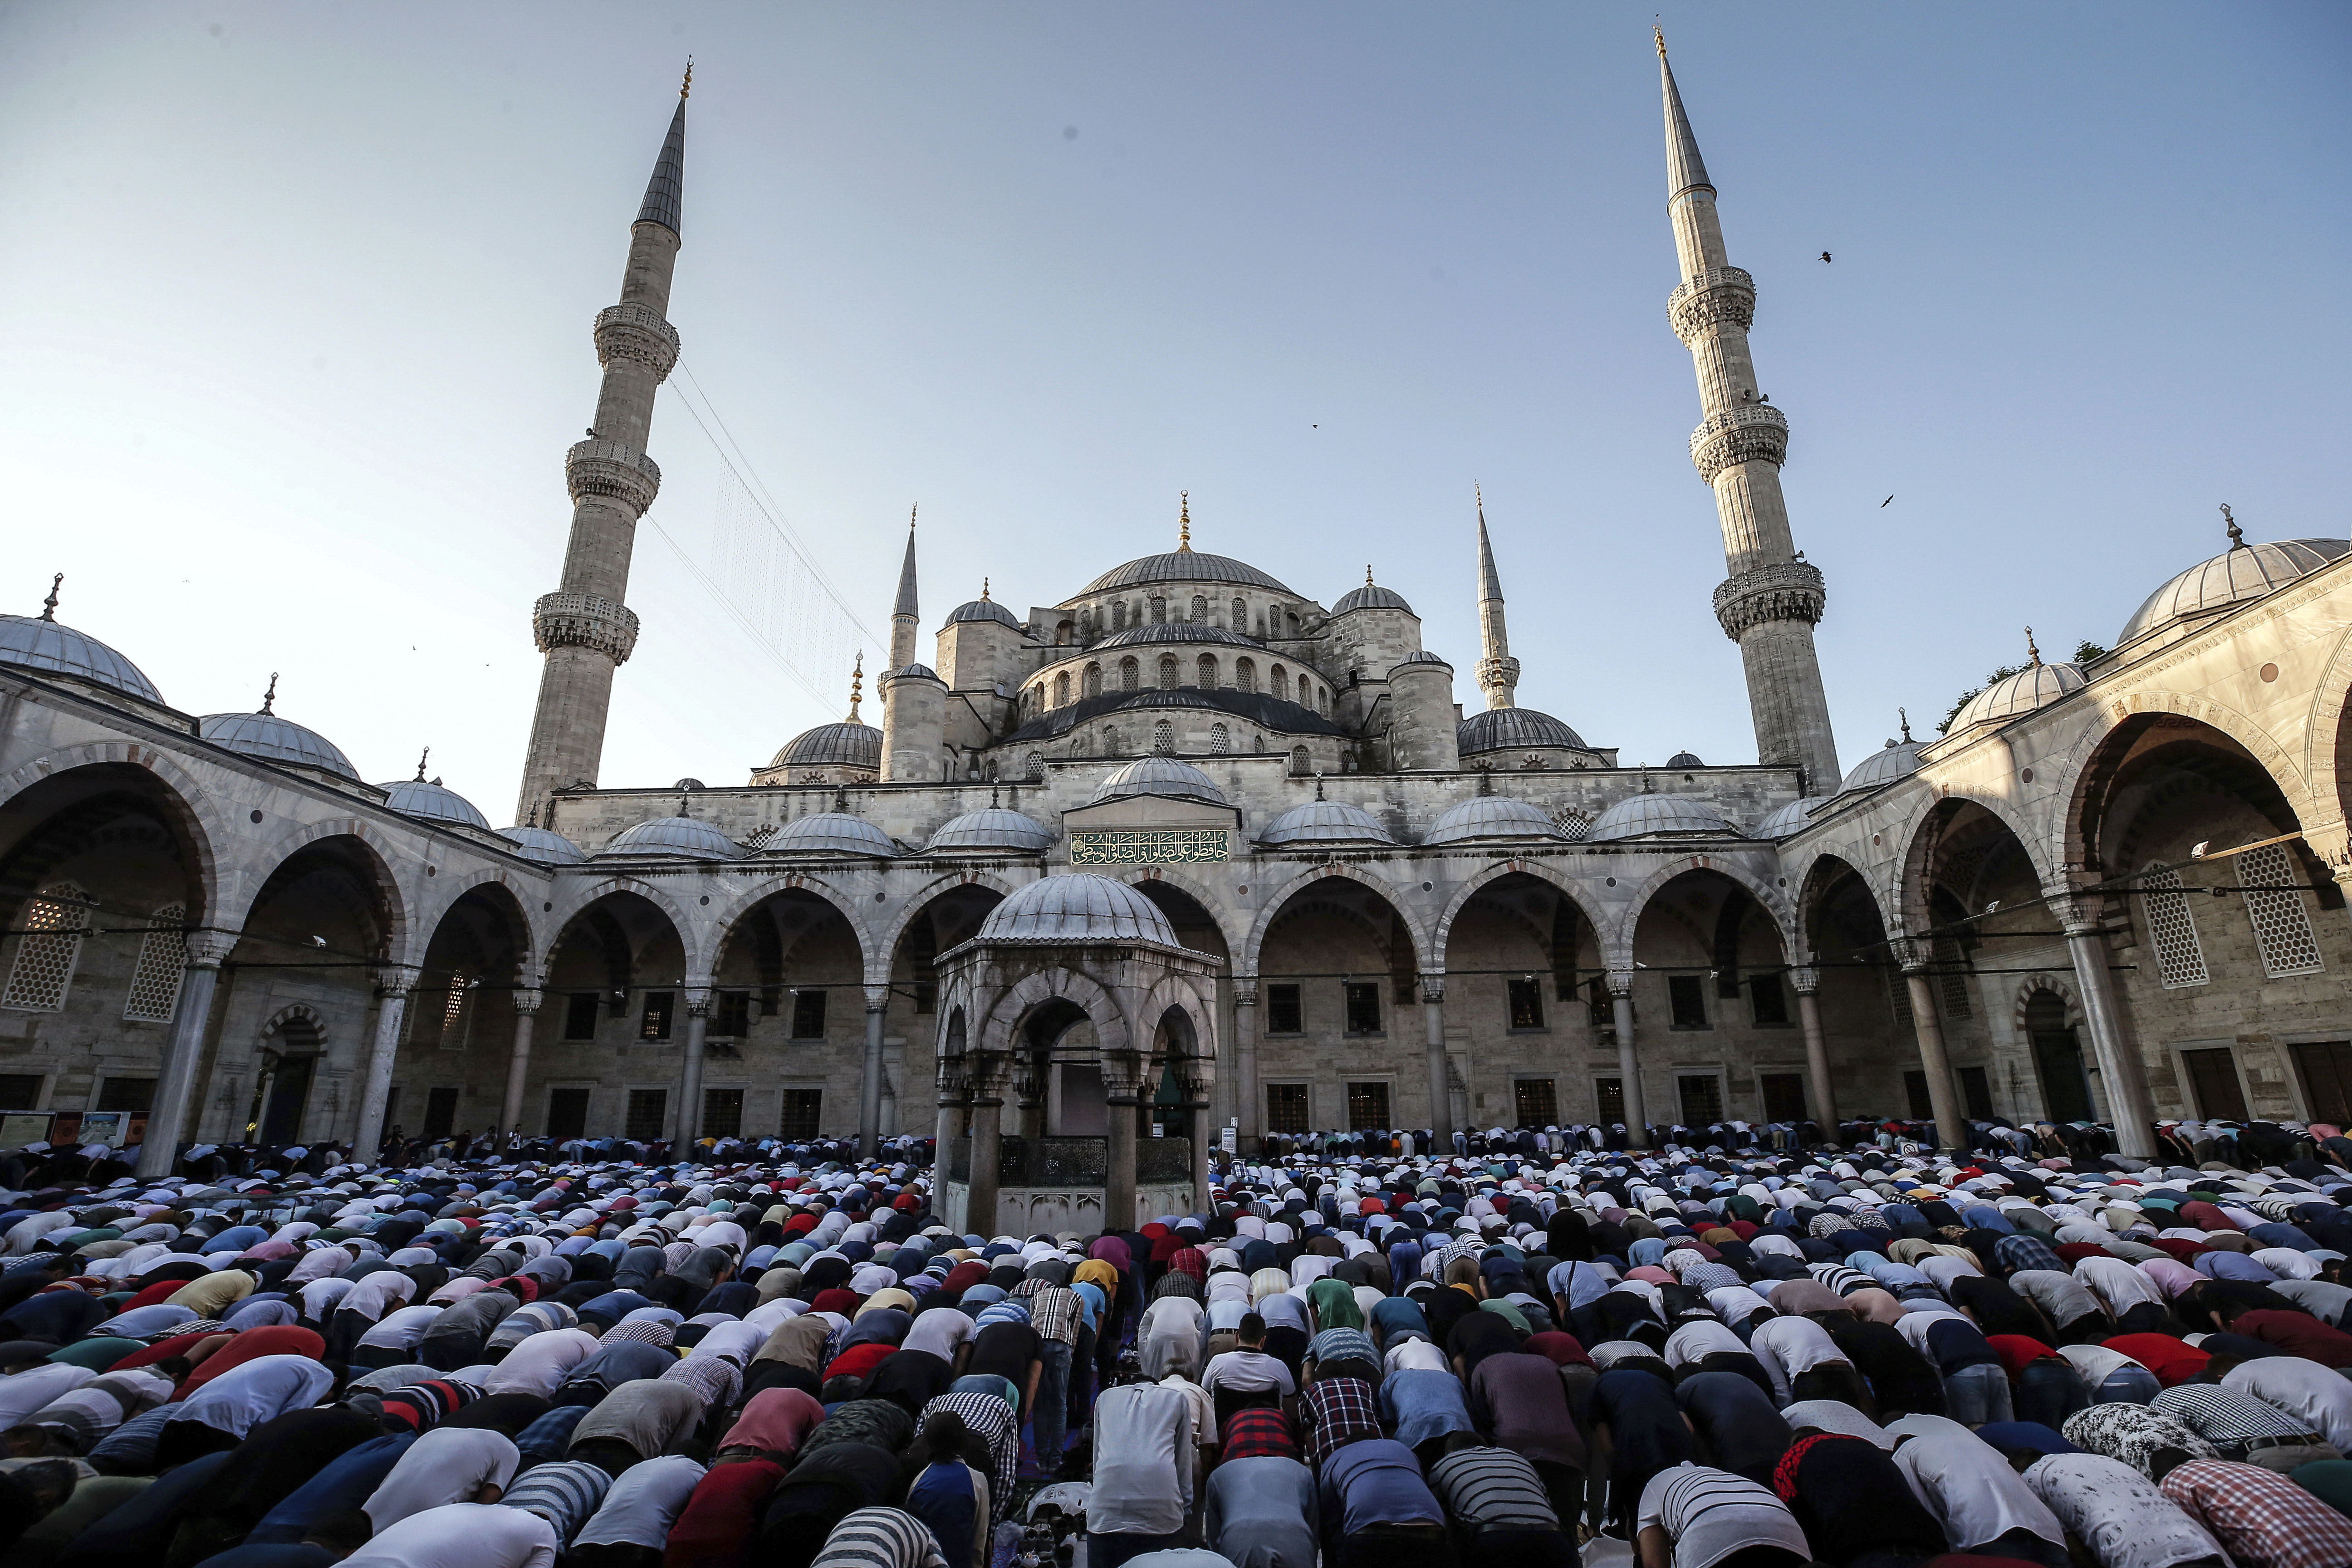 Turkish Muslims offer Eid al-Fitr prayers at the city's landmark Sultan Ahmed Mosque, or Blue Mosque, in Istanbul, early Sunday, June 25, 2017. Eid al-Fitr marks the end of the Muslims' holy fasting month of Ramadan. (AP Photo/Emrah Gurel)